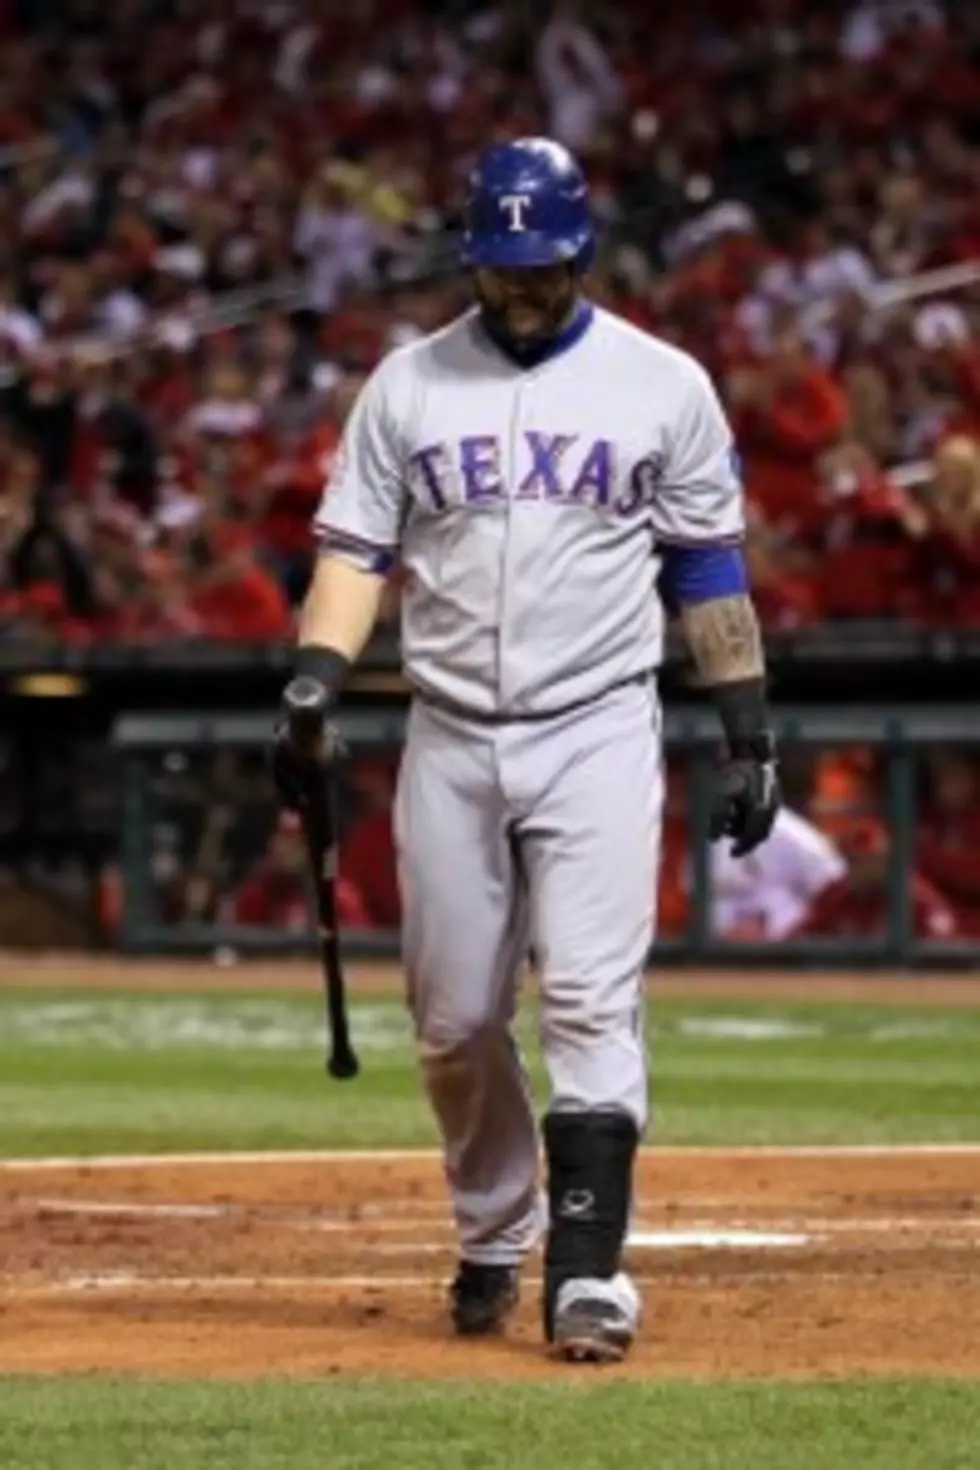 What Are the Rangers Getting by Signing Mike Napoli?